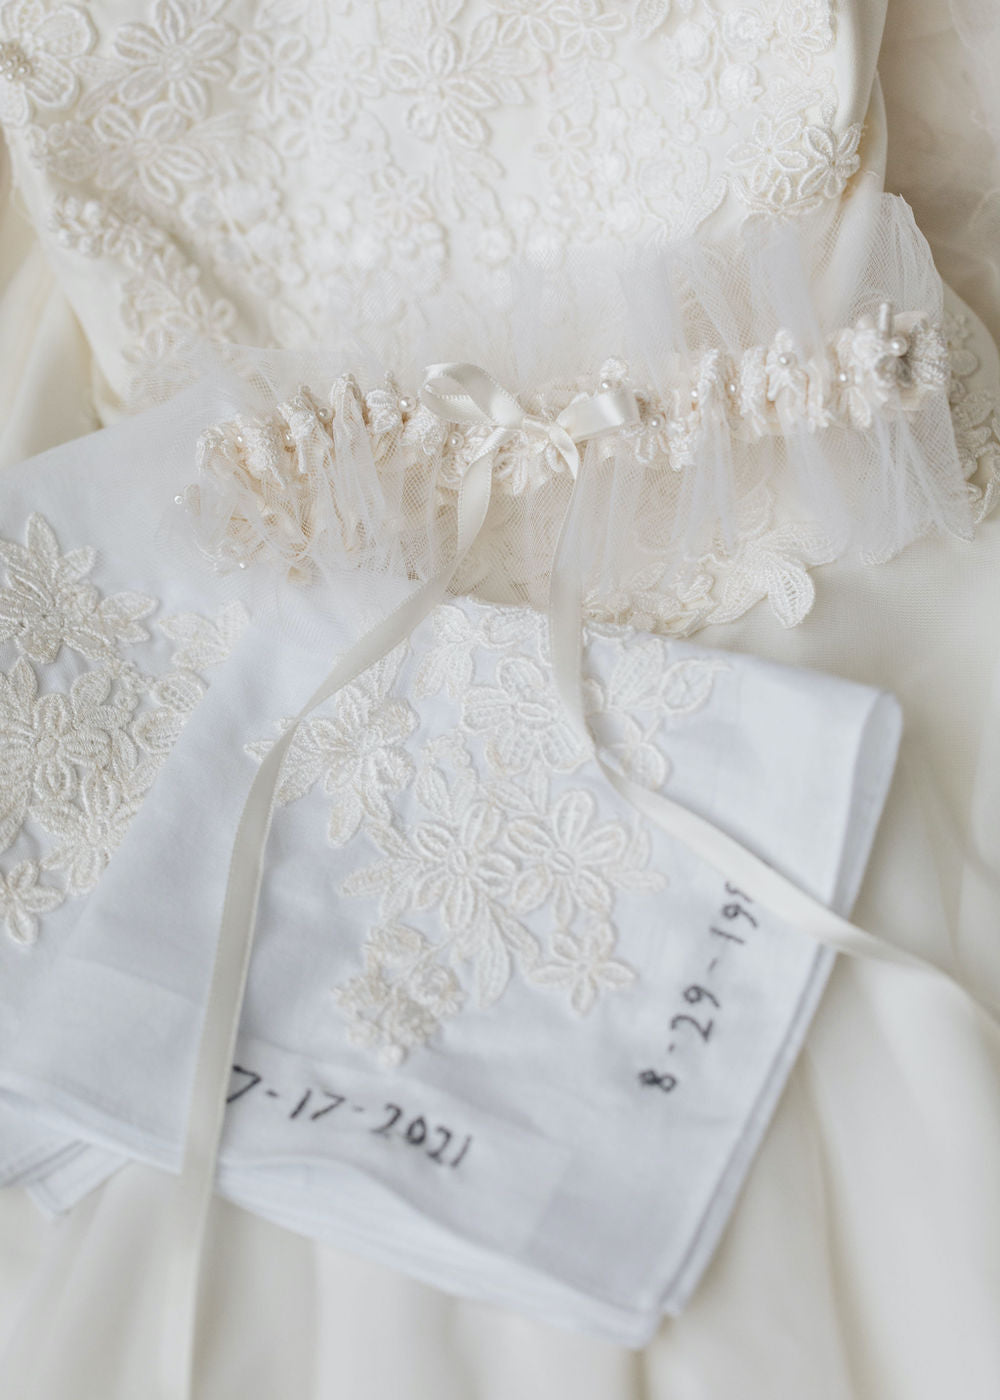 how to use your mom's wedding dress with custom wedding garter and personalized handkerchiefs by expert bridal heirloom designer, The Garter Girl